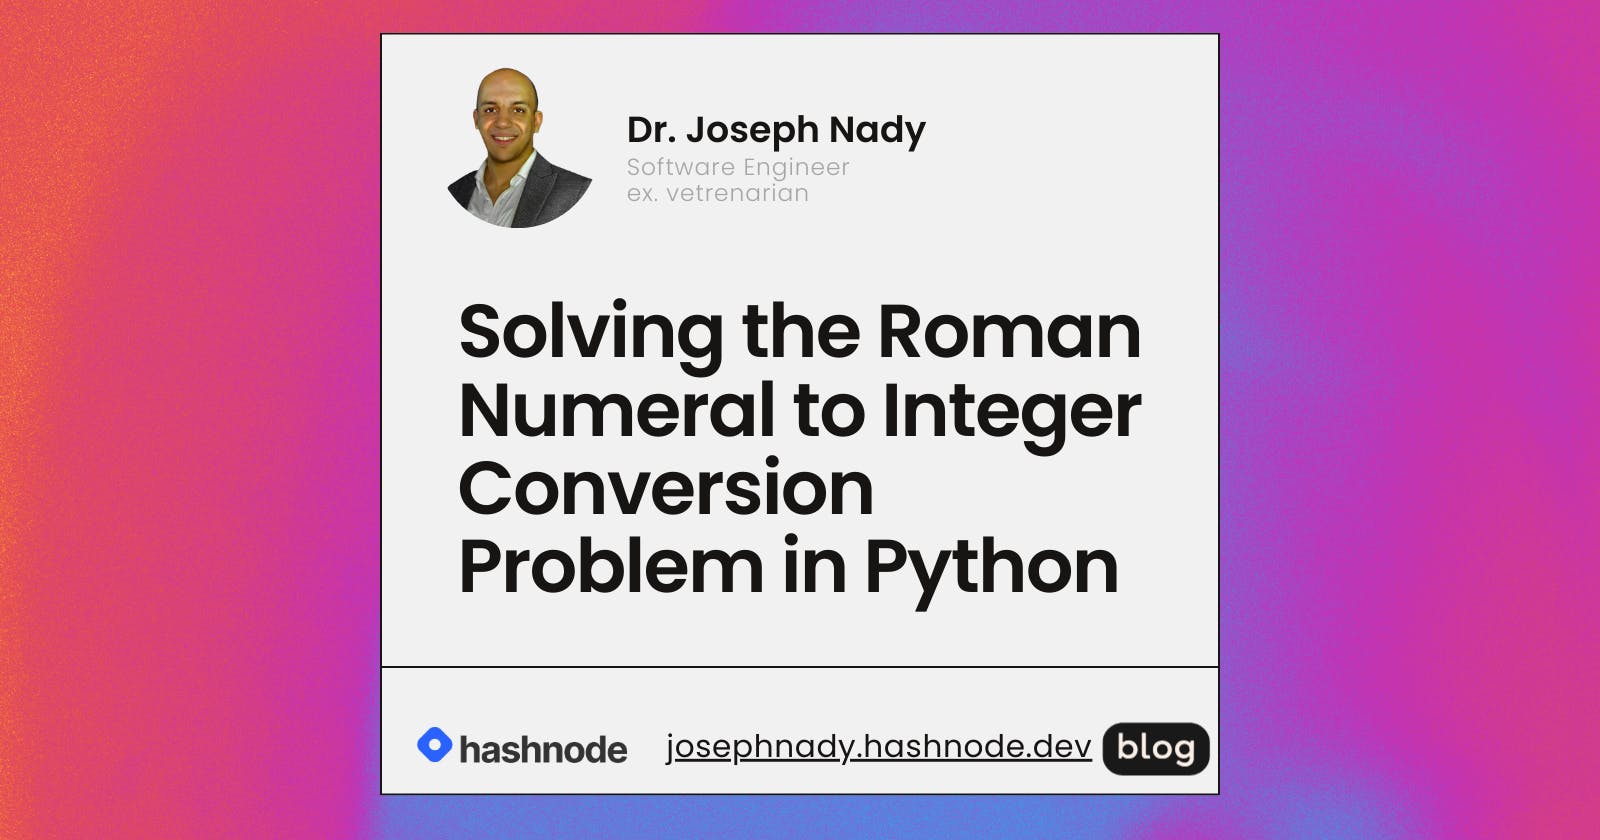 Solving the 🏛Roman Numeral to Integer Conversion Problem in ⚡Python